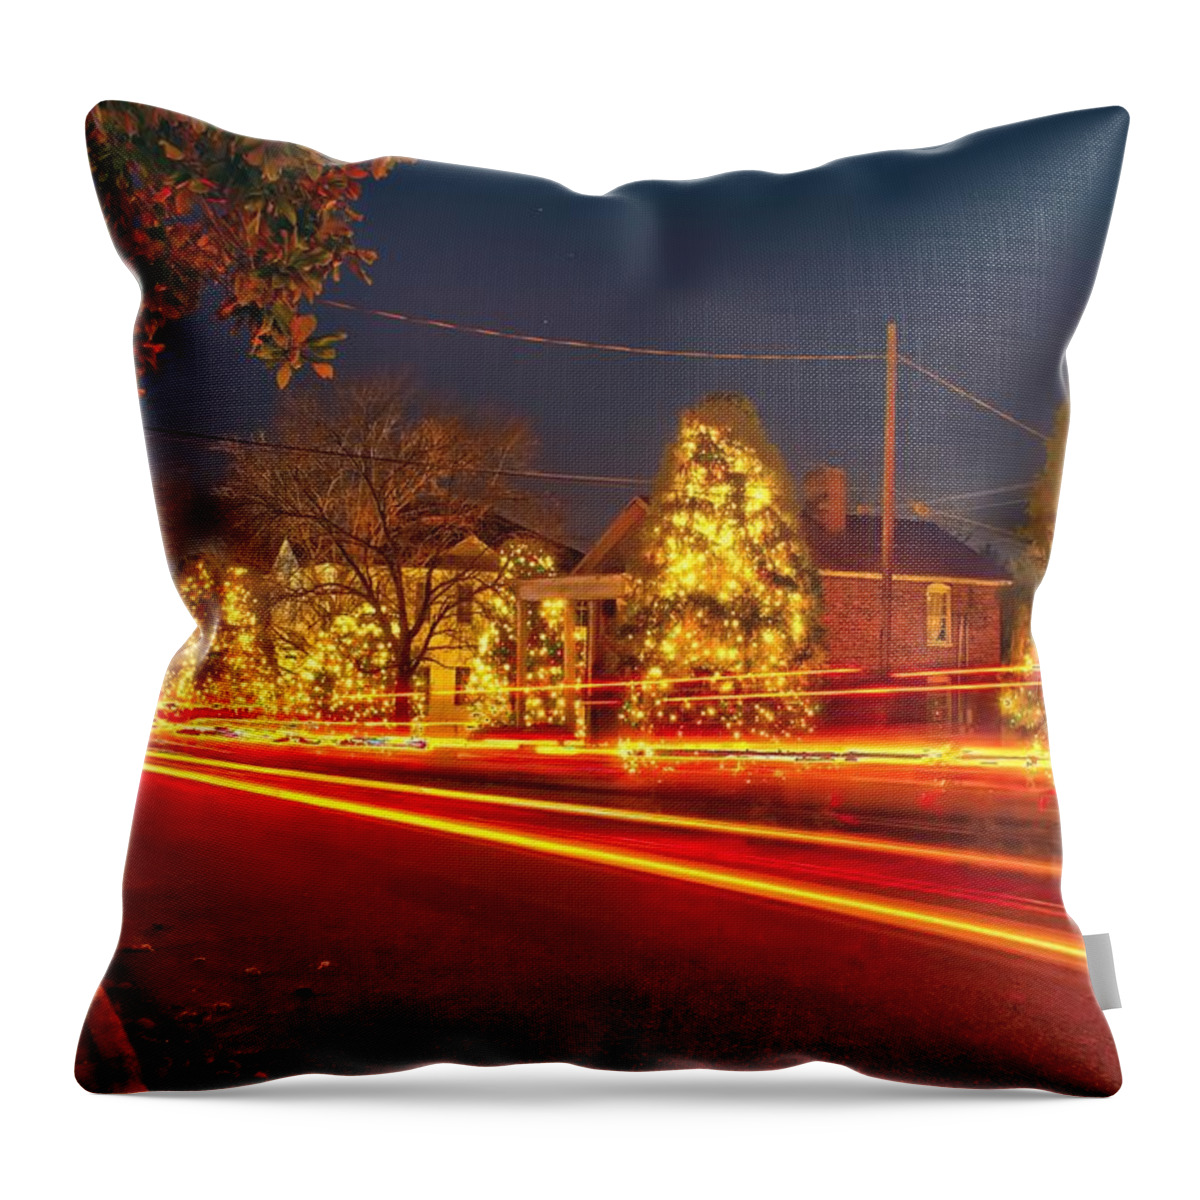 Awesome Throw Pillow featuring the photograph Christmas Town Usa by Alex Grichenko